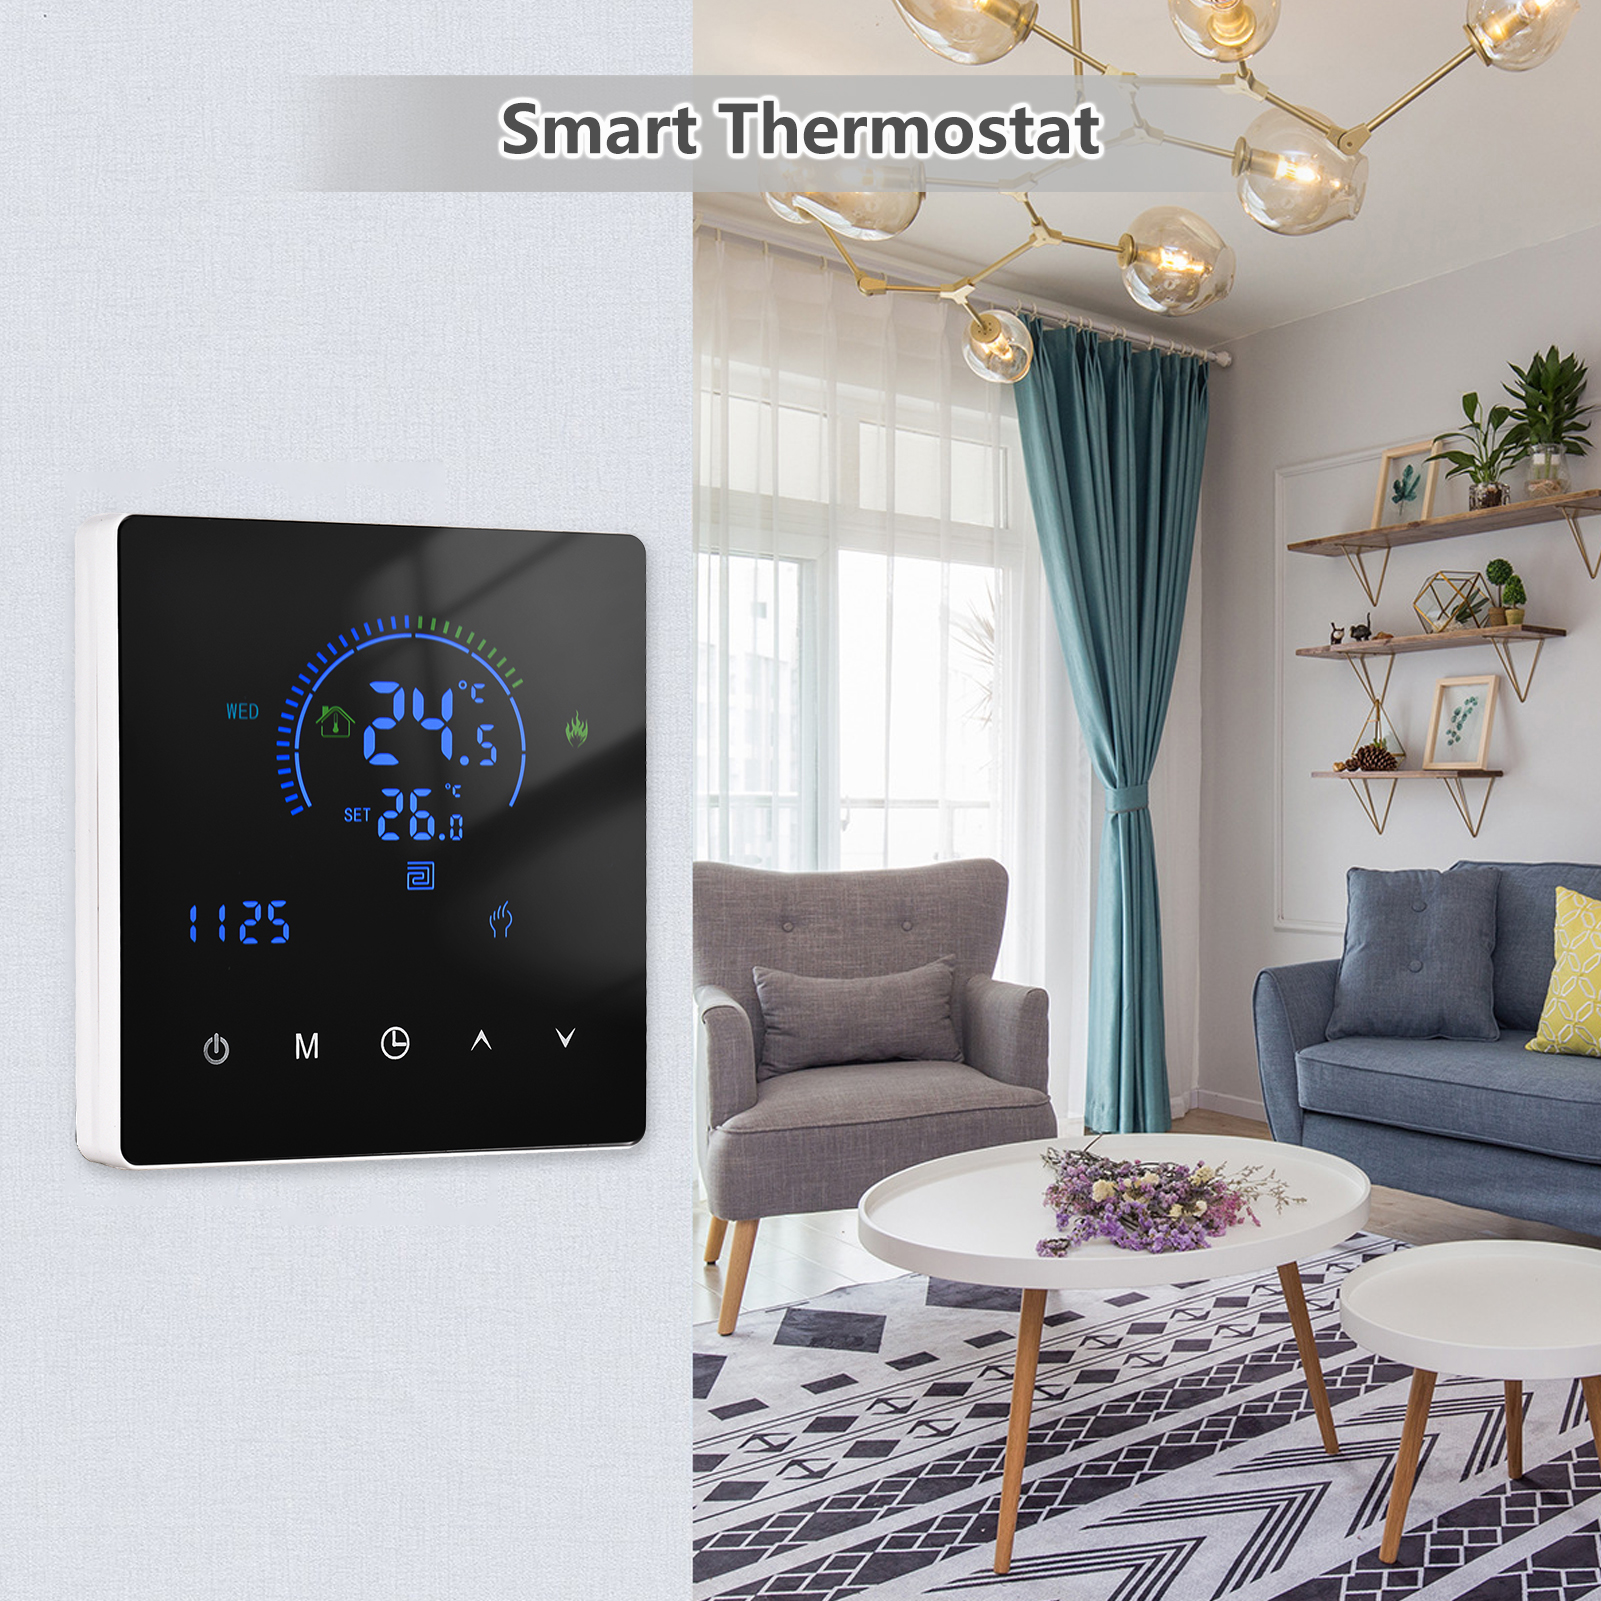 Tomshoo Ultra Thin Smart Thermostat Temperature Controller for Water Heating Button & LCD Display - image 2 of 7